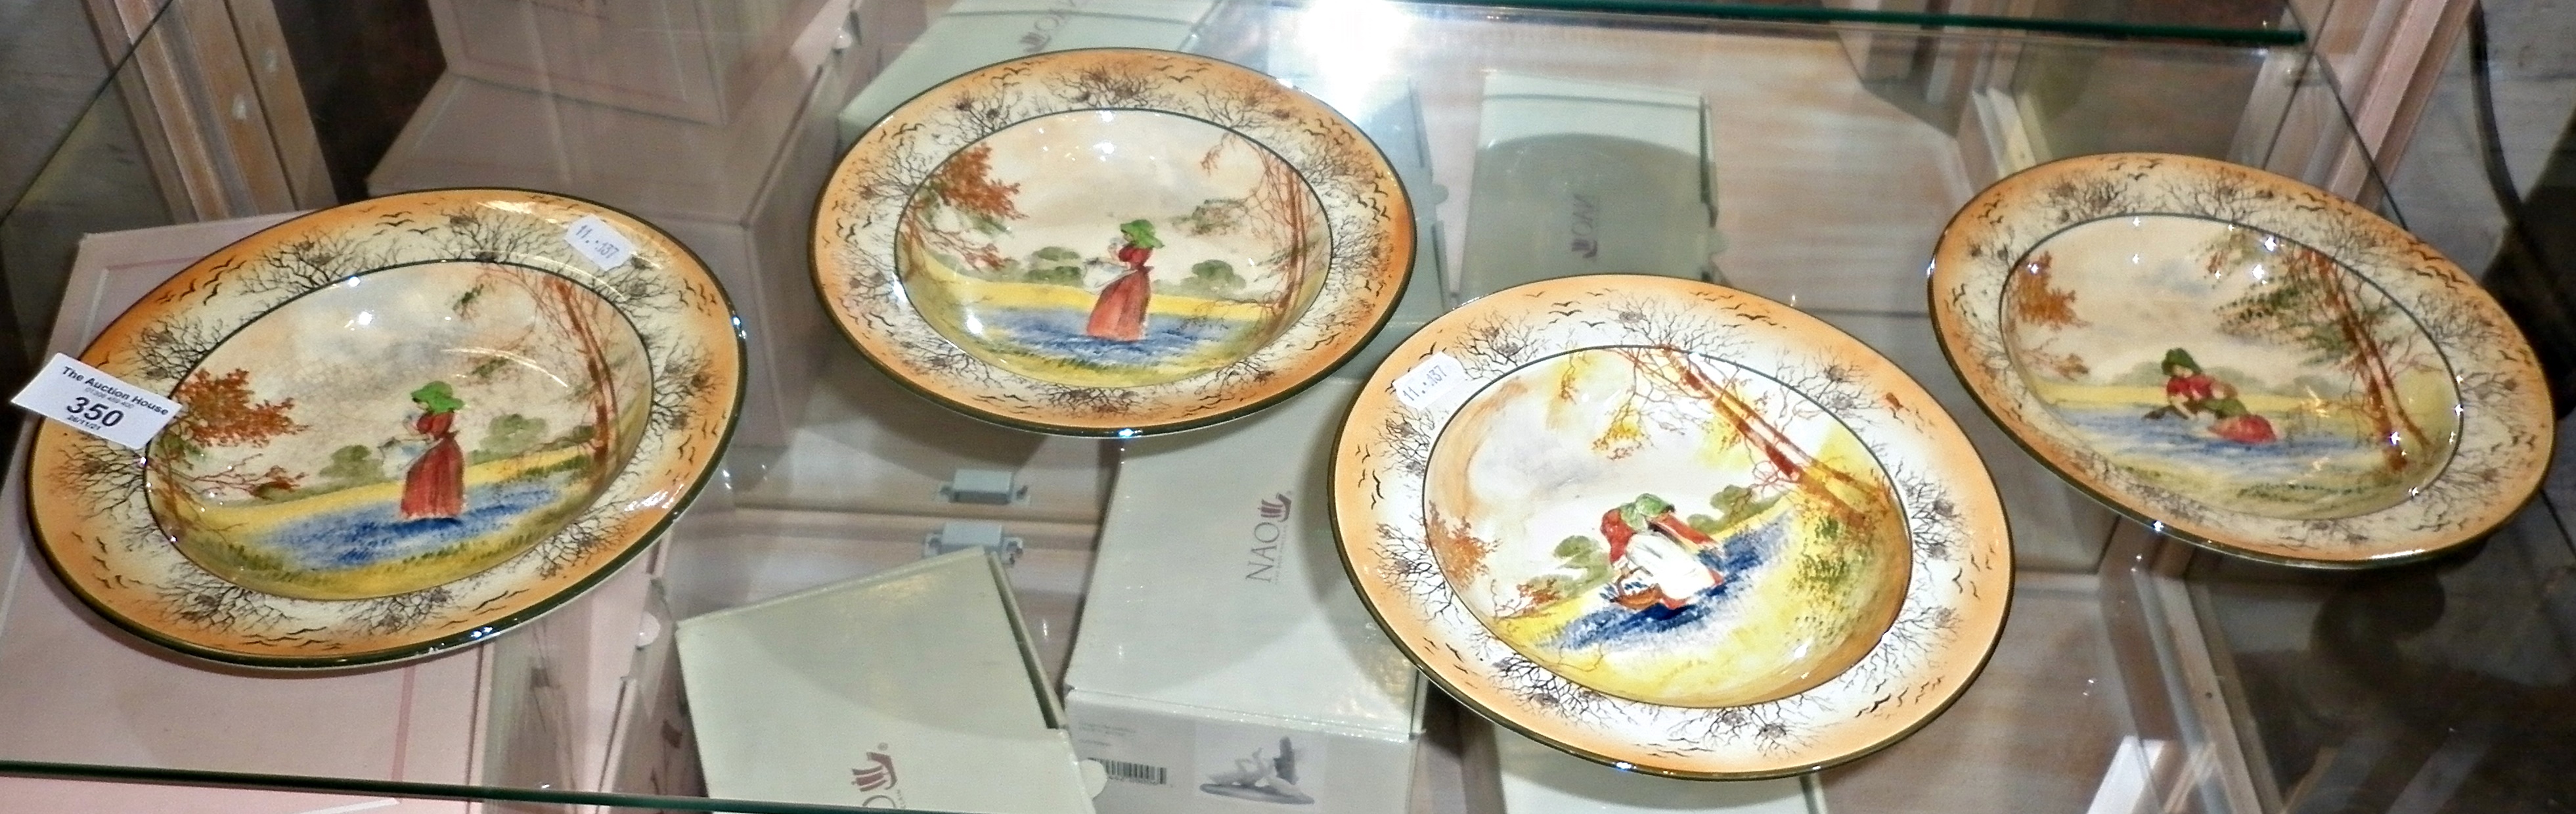 Set of four Royal Doulton "The Bluebell Gatherers" bowls, c. 1915